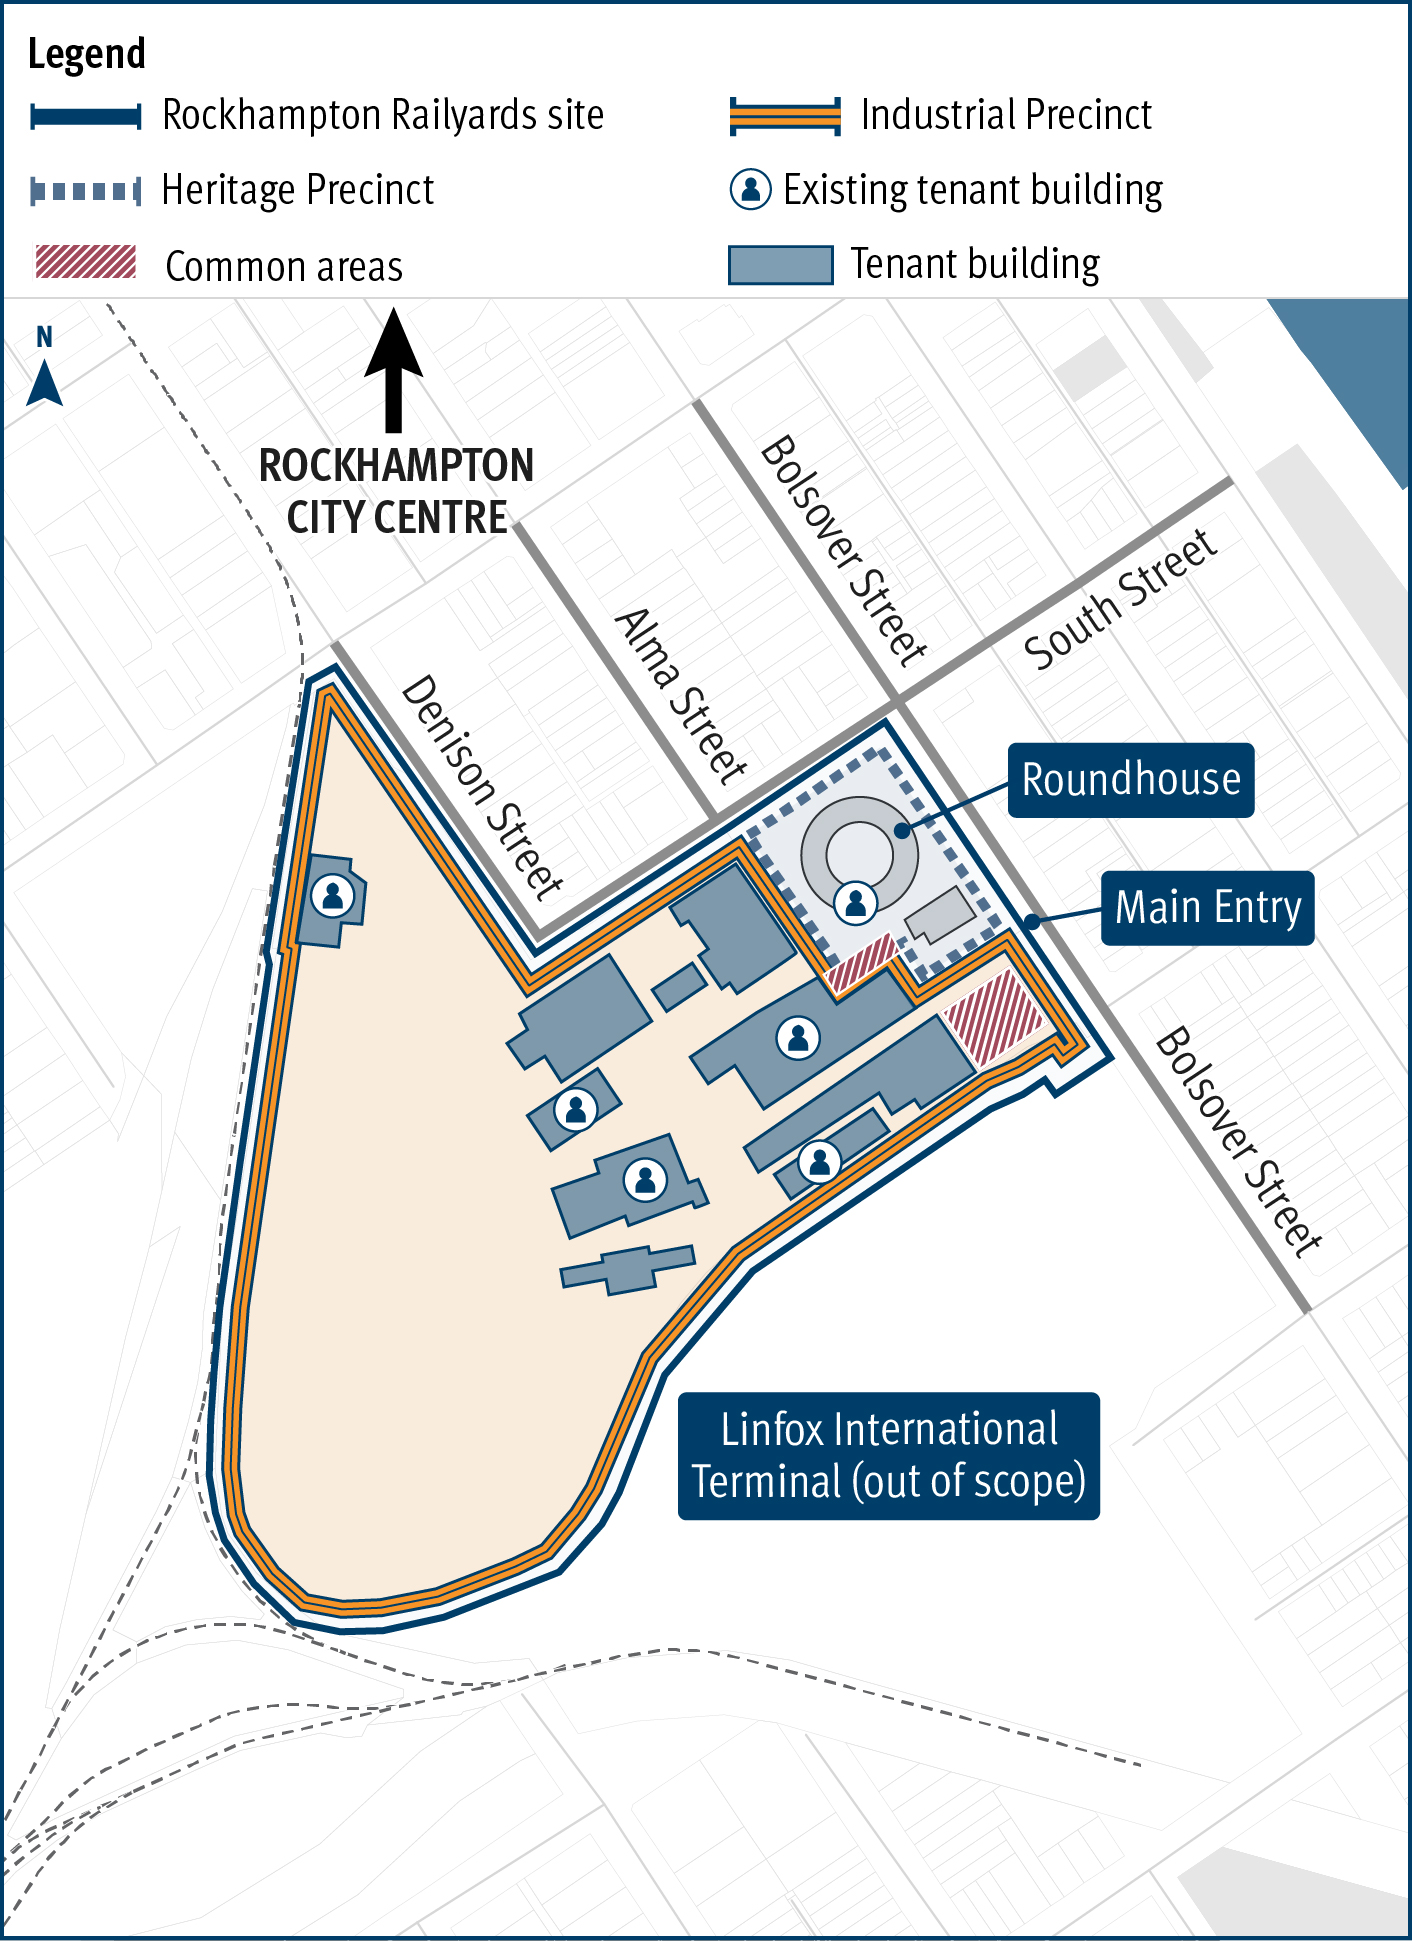 Site map of the Rockhampton Railyards on the corner of Bolsover and South streets. The map is showing two precincts – the larger precinct is shown as the Industrial Precinct and the smaller precinct which includes the Roundhouse is shown as the Heritage Precinct. 